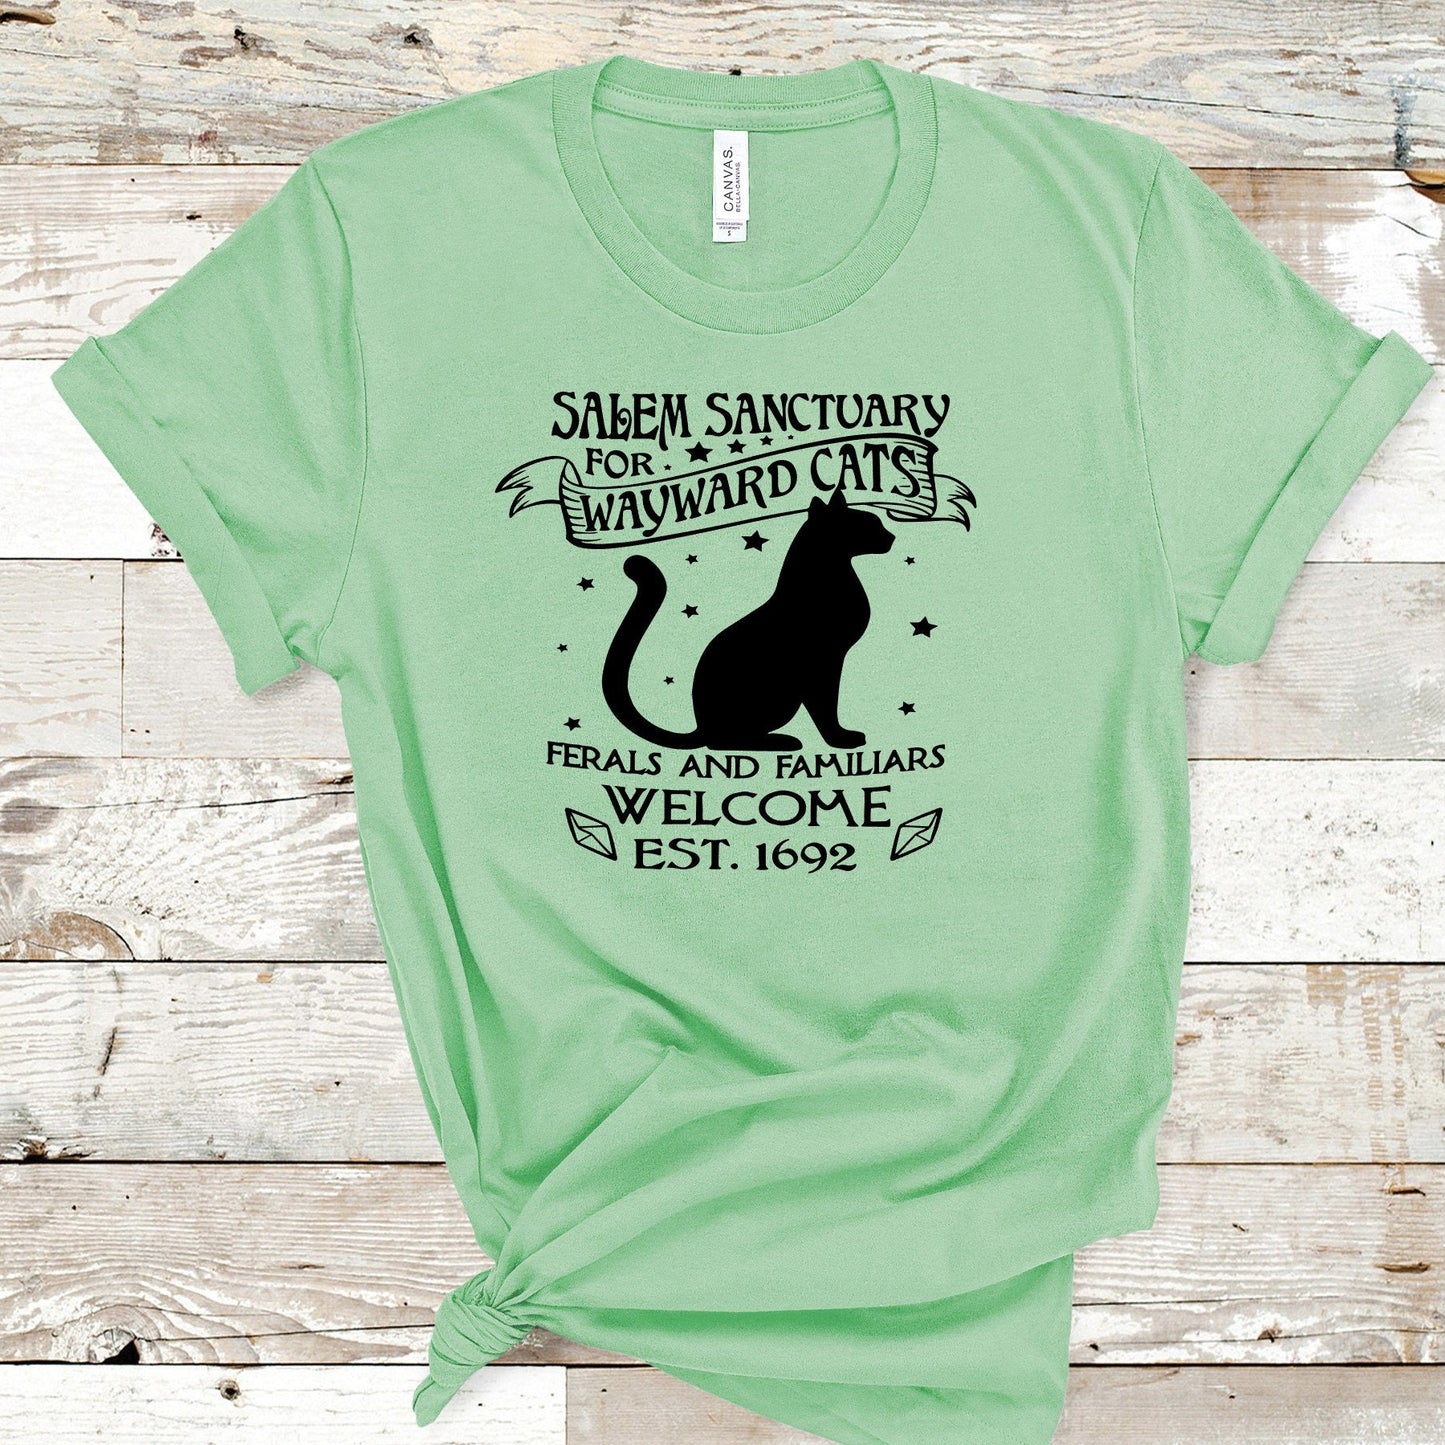 Salem Sanctuary For Wayward Cats, Ferals and Familiars Welcome,  Est 1692, We Love Black Cats, Cat Lover Tee, Witch Familiar, Feral Cats tee